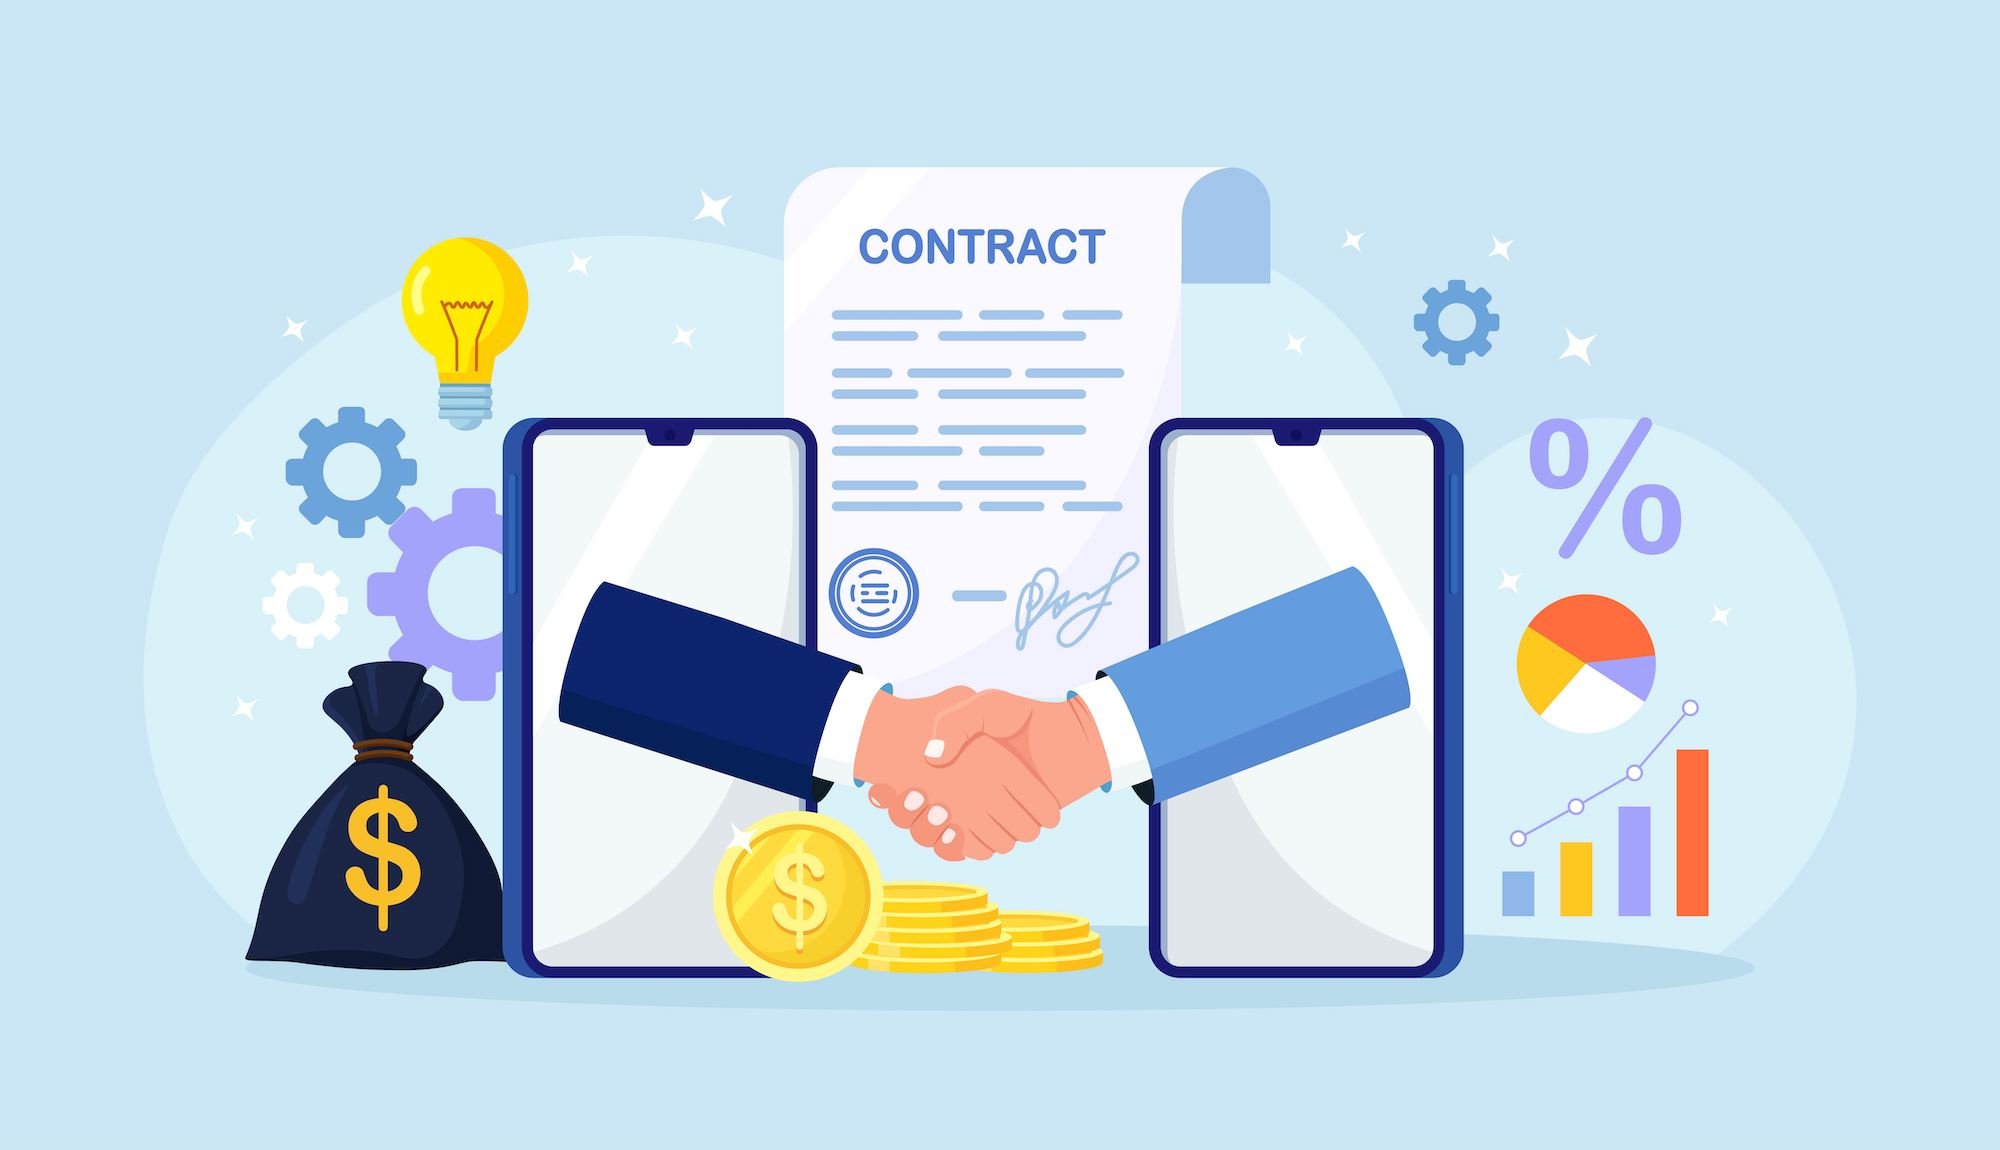 Automating the Contract-to-Cash Process Step by Step